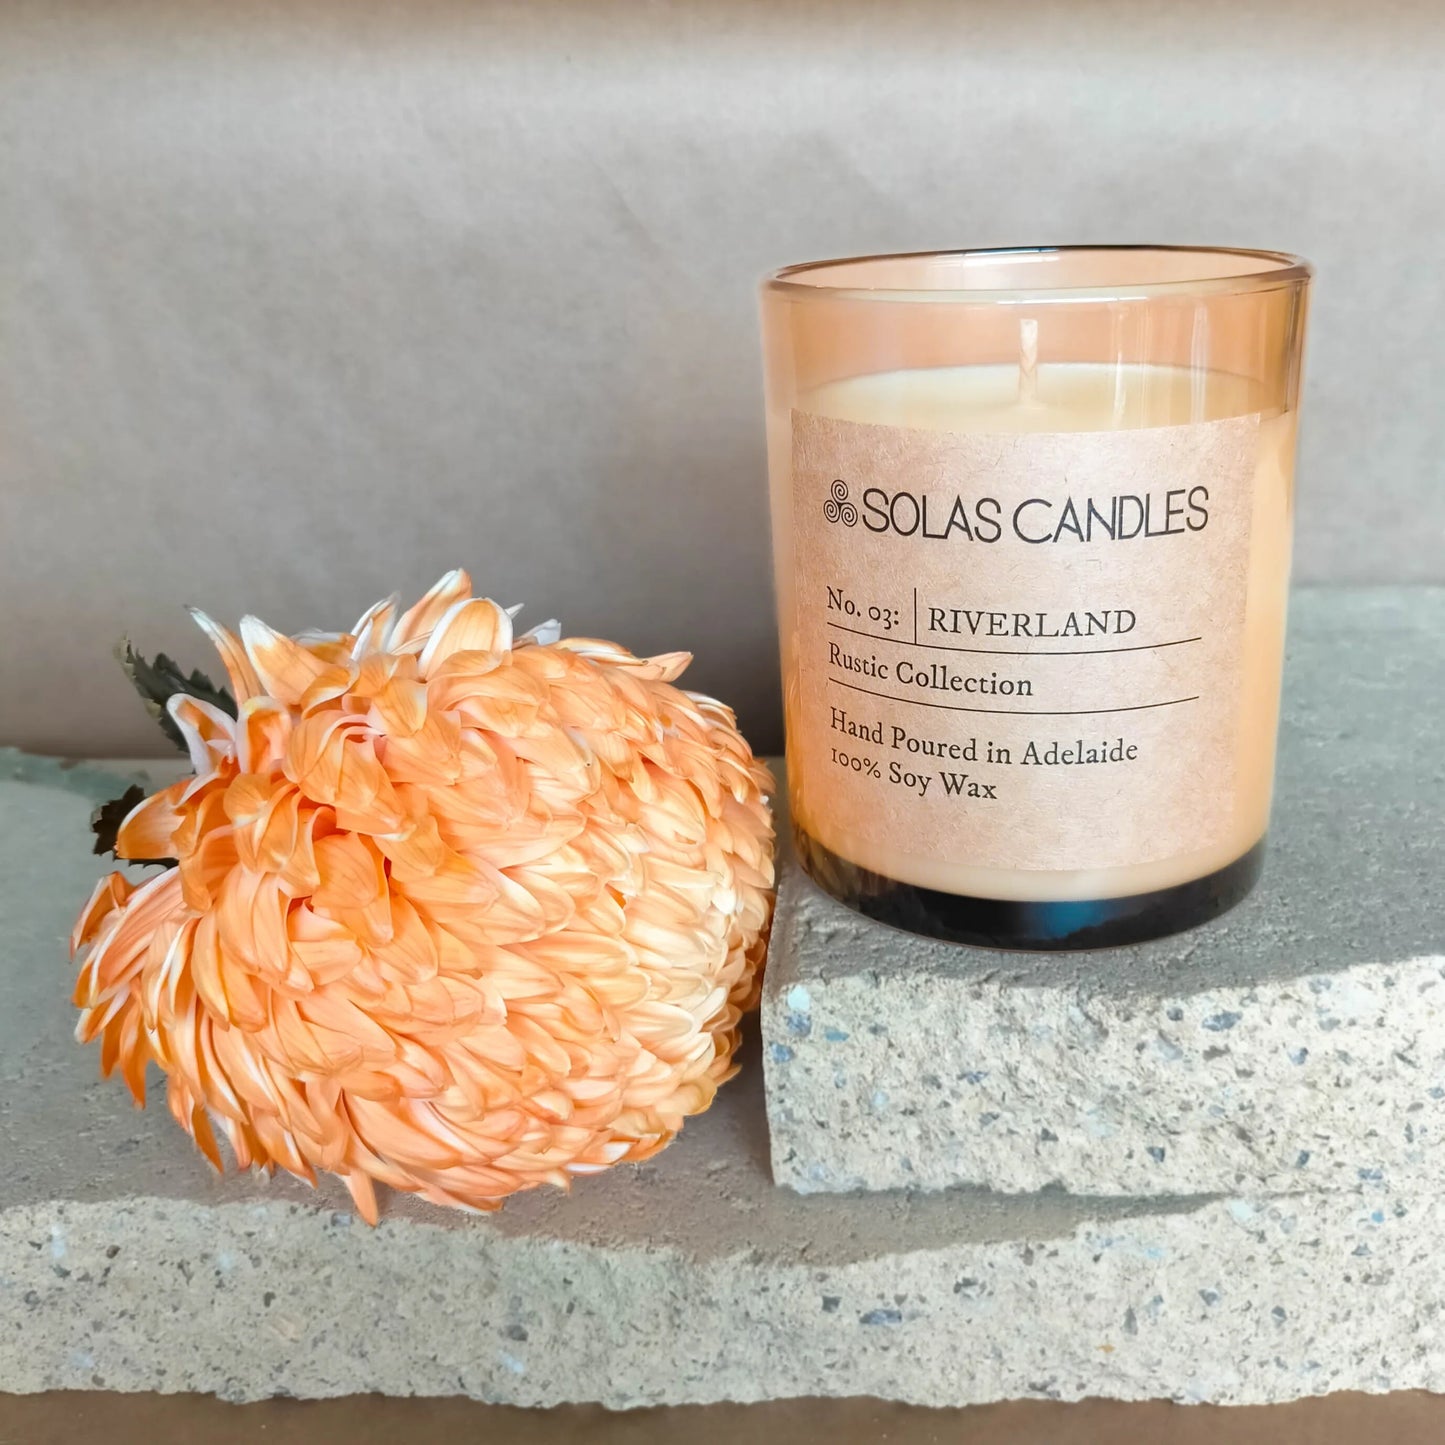 Solas Candles - Rustic Collection, No.03 Riverland